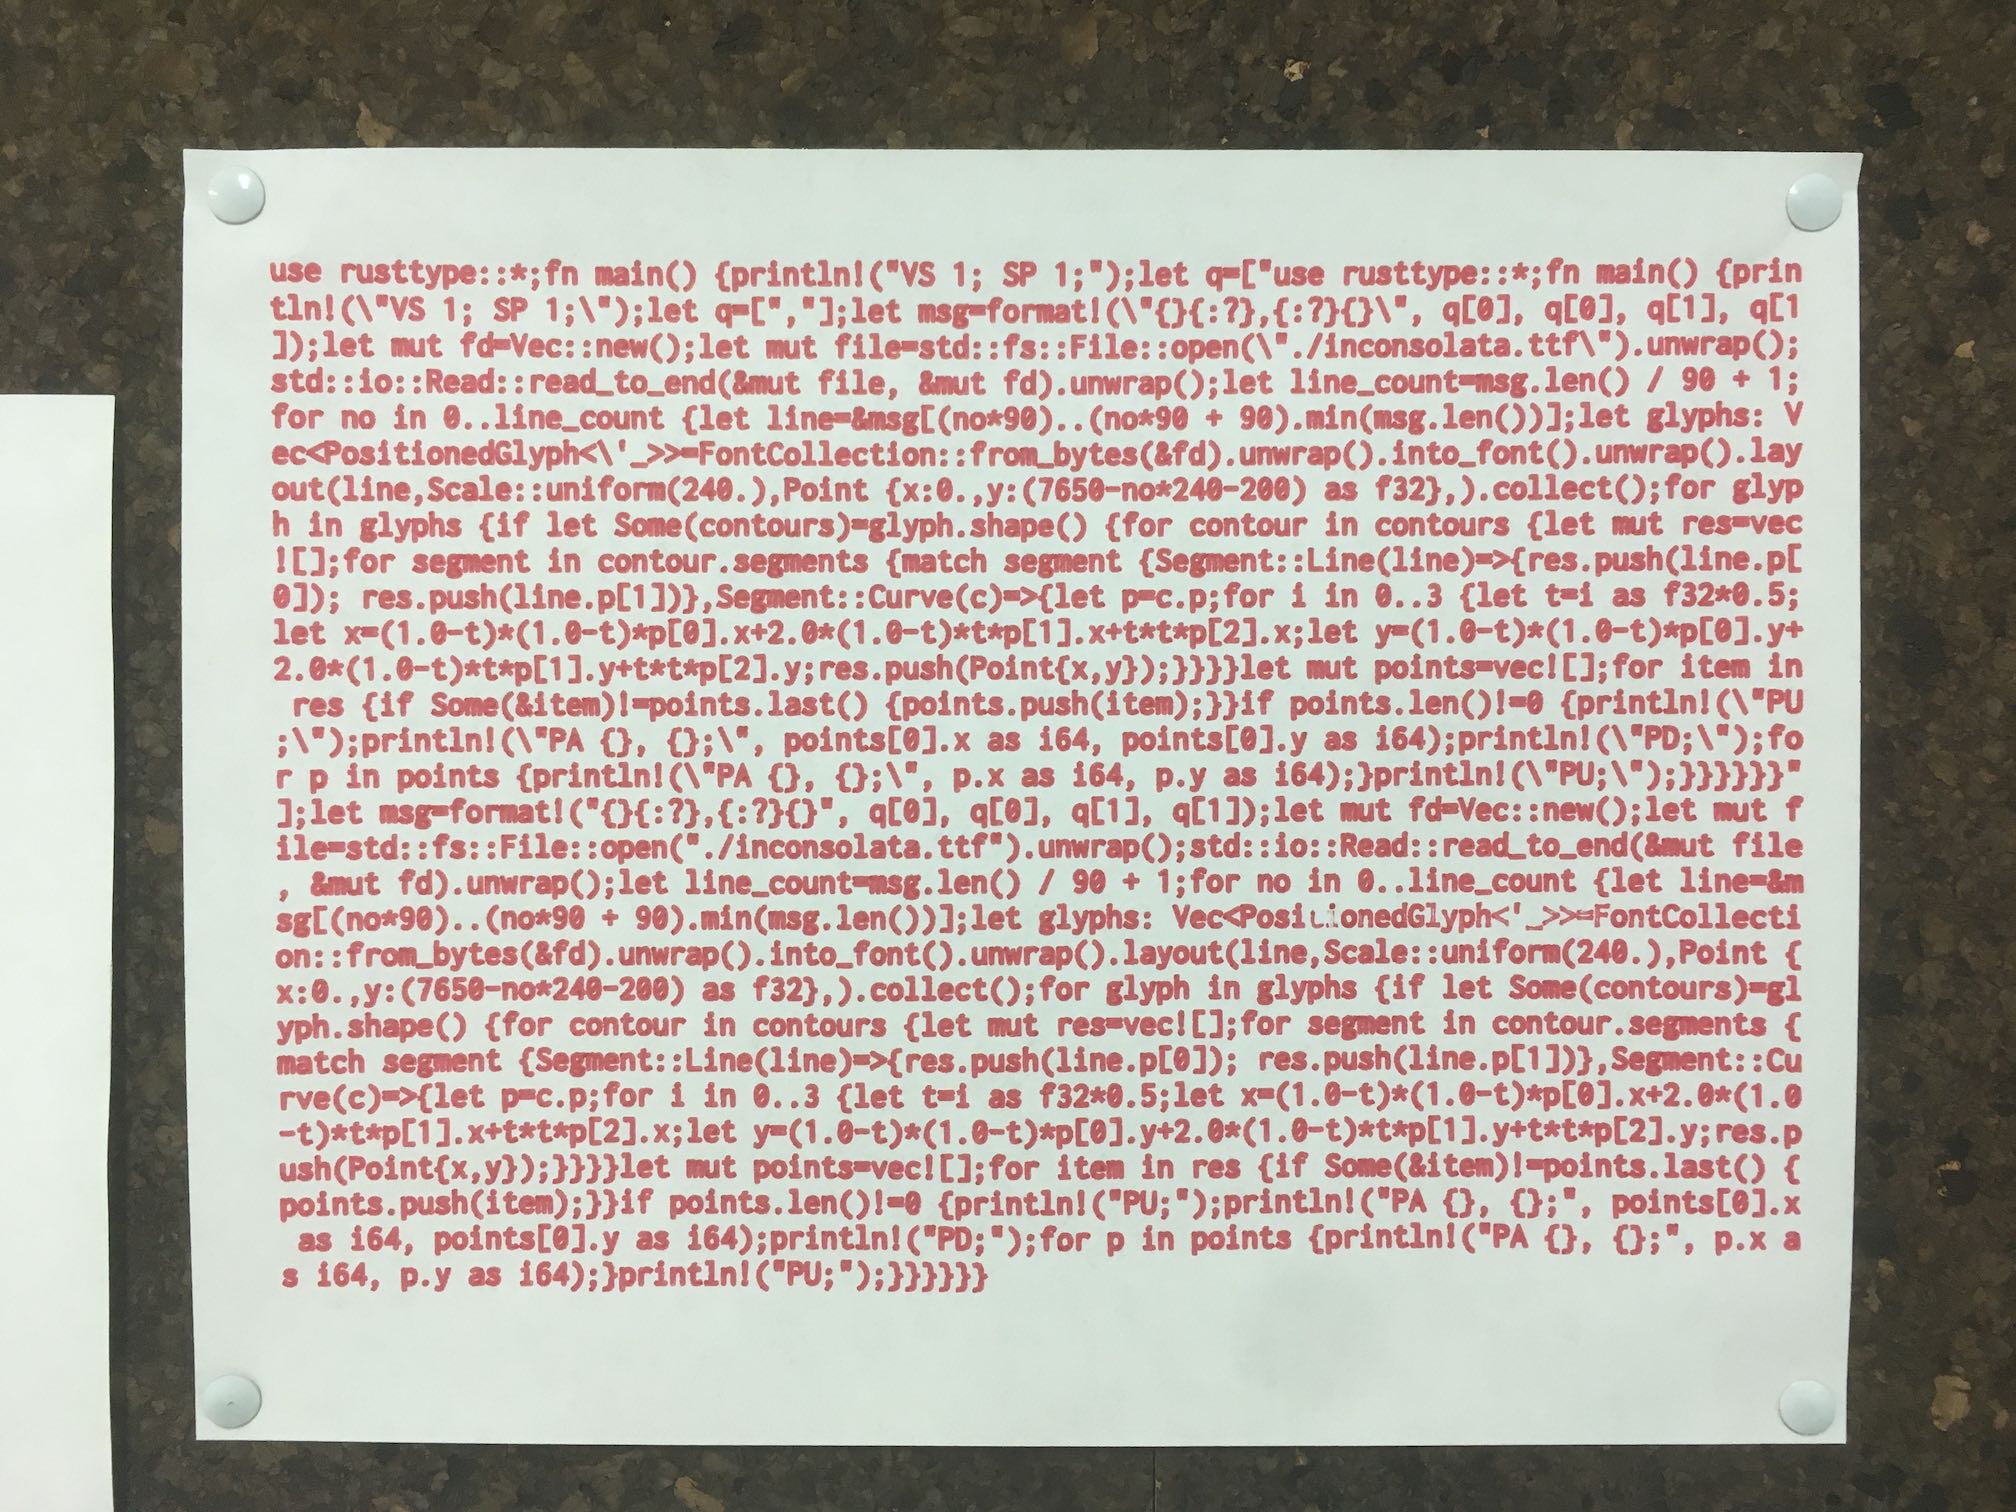 The source code of the quine, printed by a plotter on an 8.5x11 sheet of paper and hung on a wall